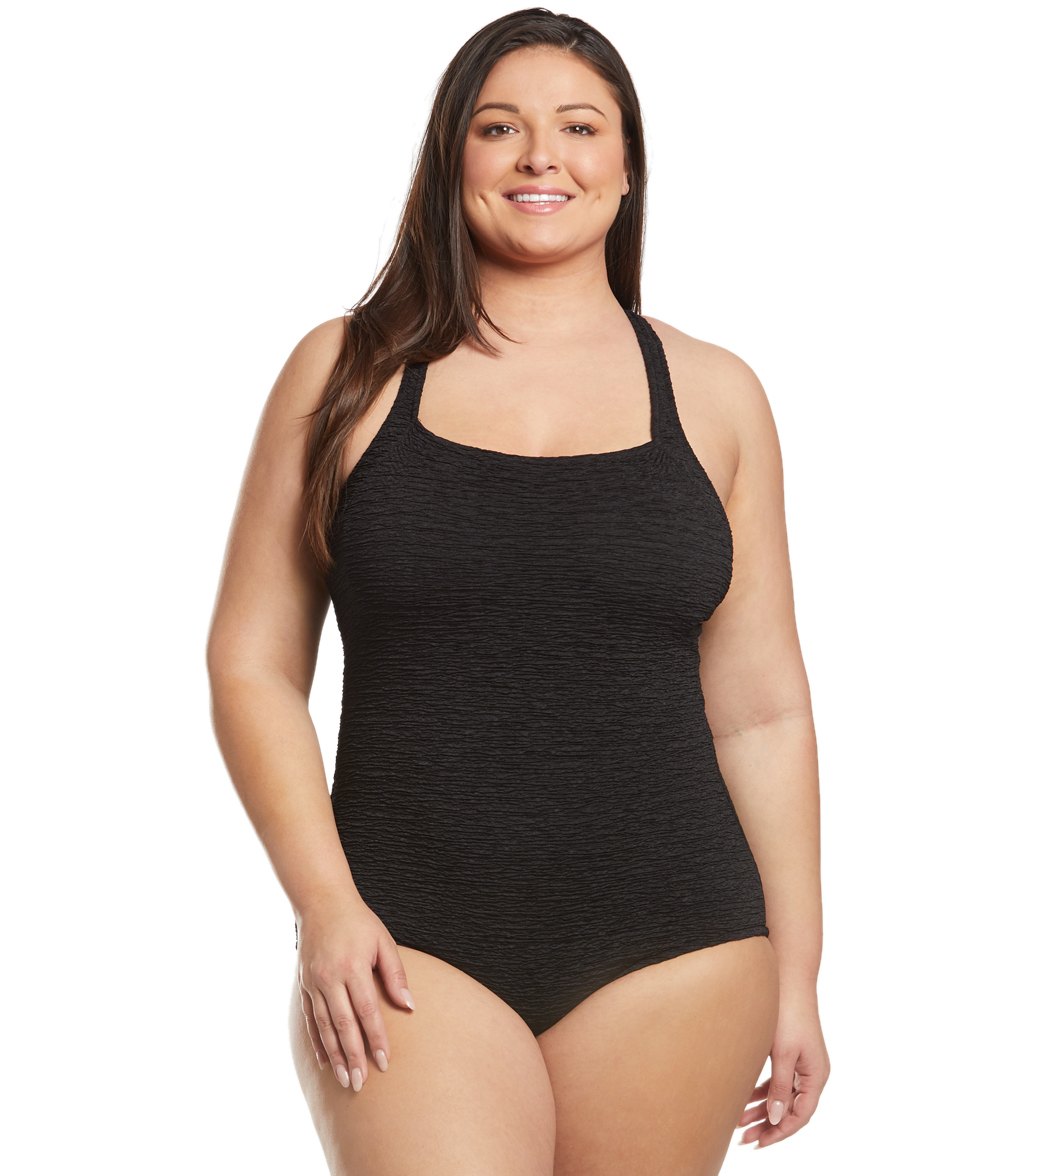 Krinkle Chlorine Resistant Swimsuit with Active Back - Black